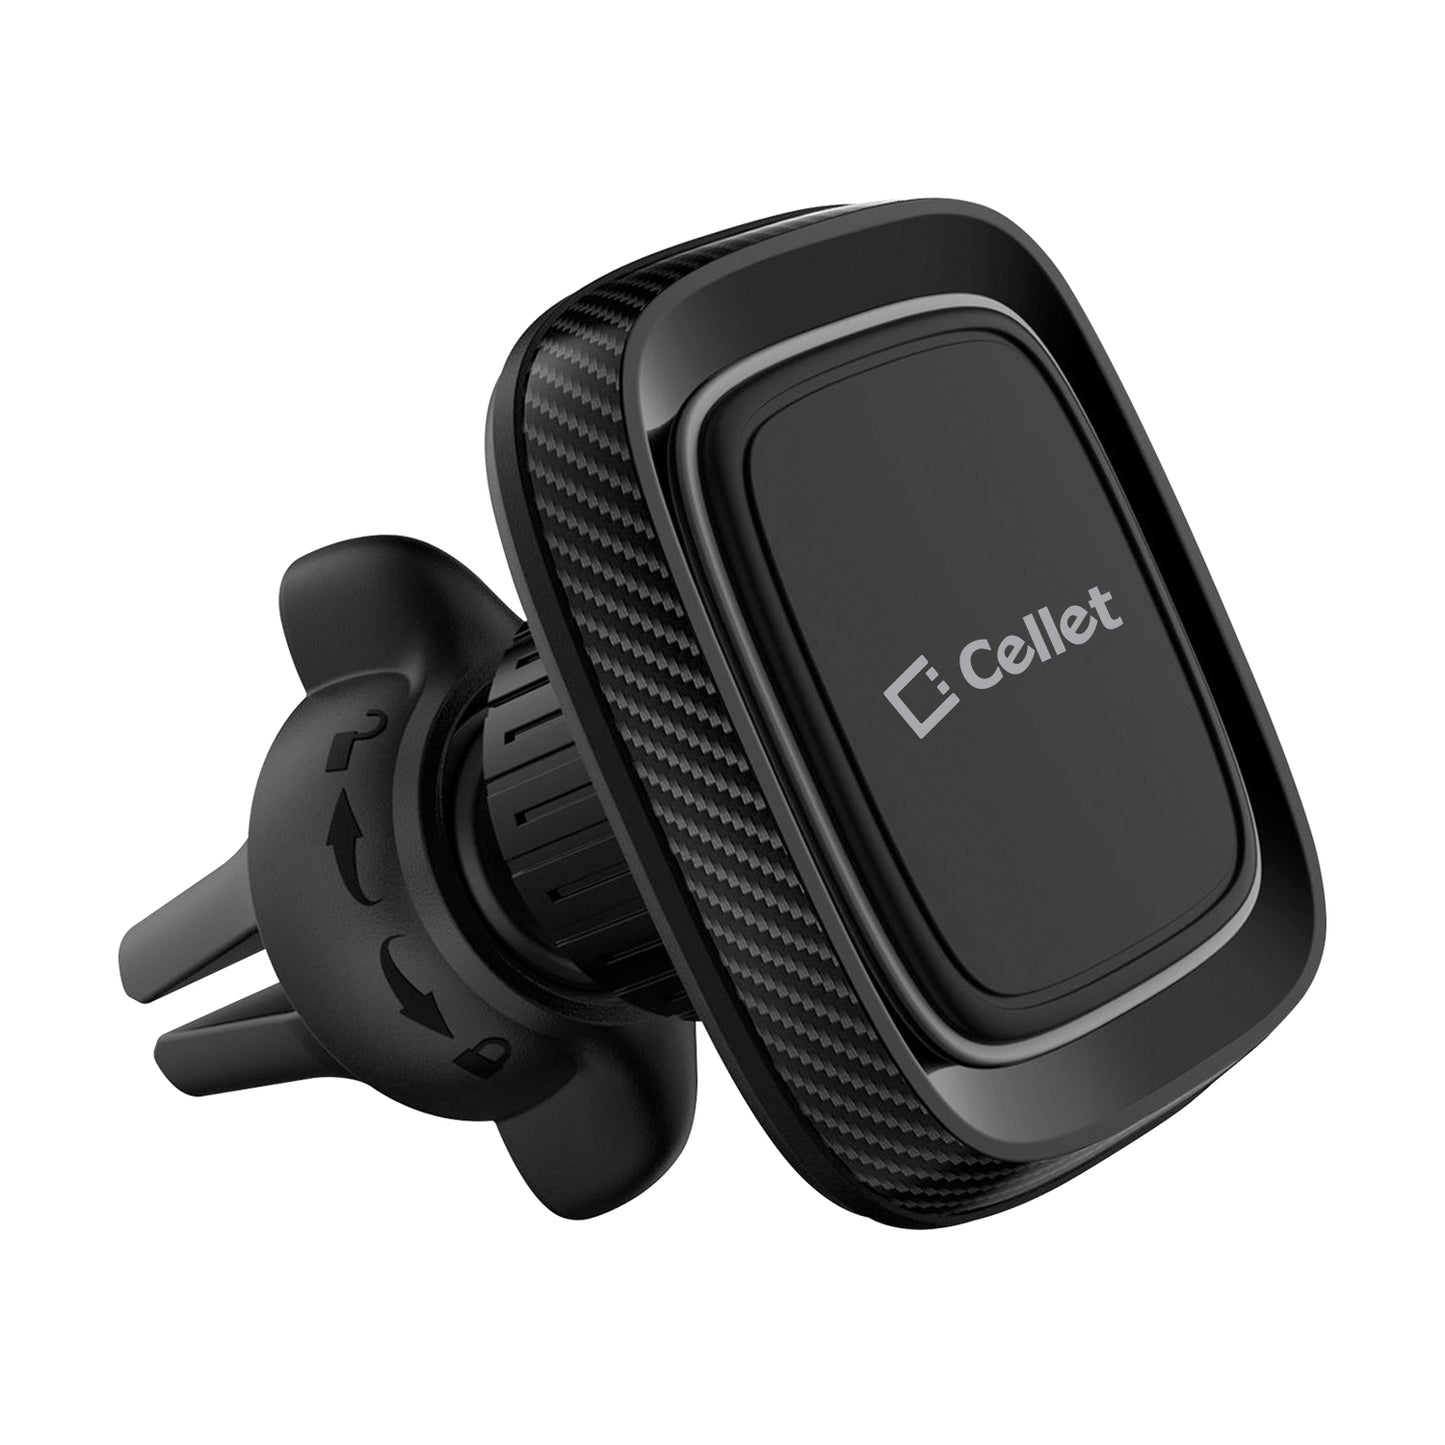 RHVMAG100 - Cellet Extra Strength Magnetic Air Vent Phone Holder Mount with 360 Rotation & Tightening Knob for Smartphones - Black